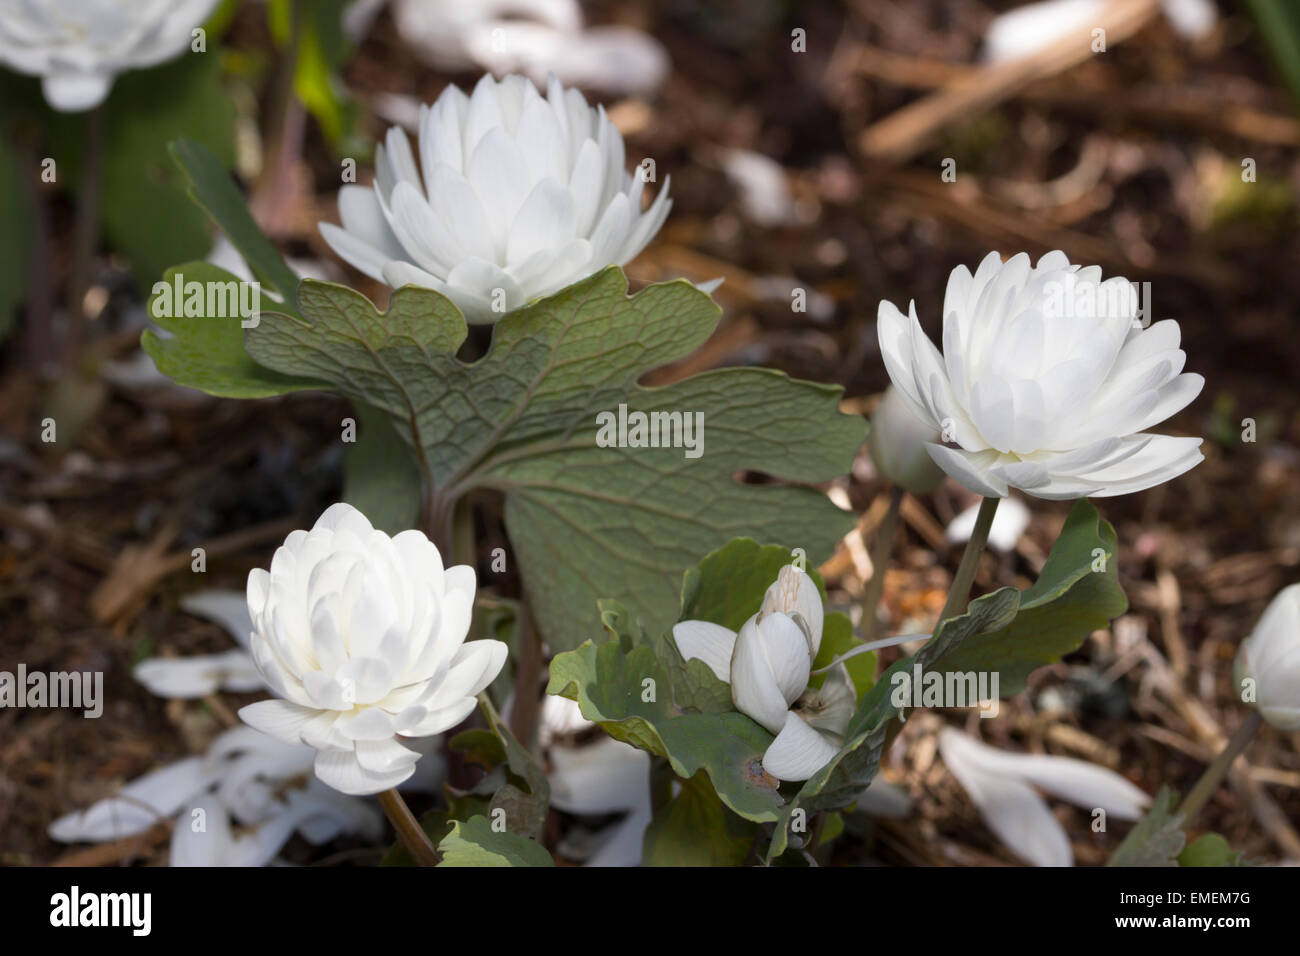 Double white flowers of the spring blooming bloodroot, Sanguinaria canadensis f. multiplex 'Plena' Stock Photo